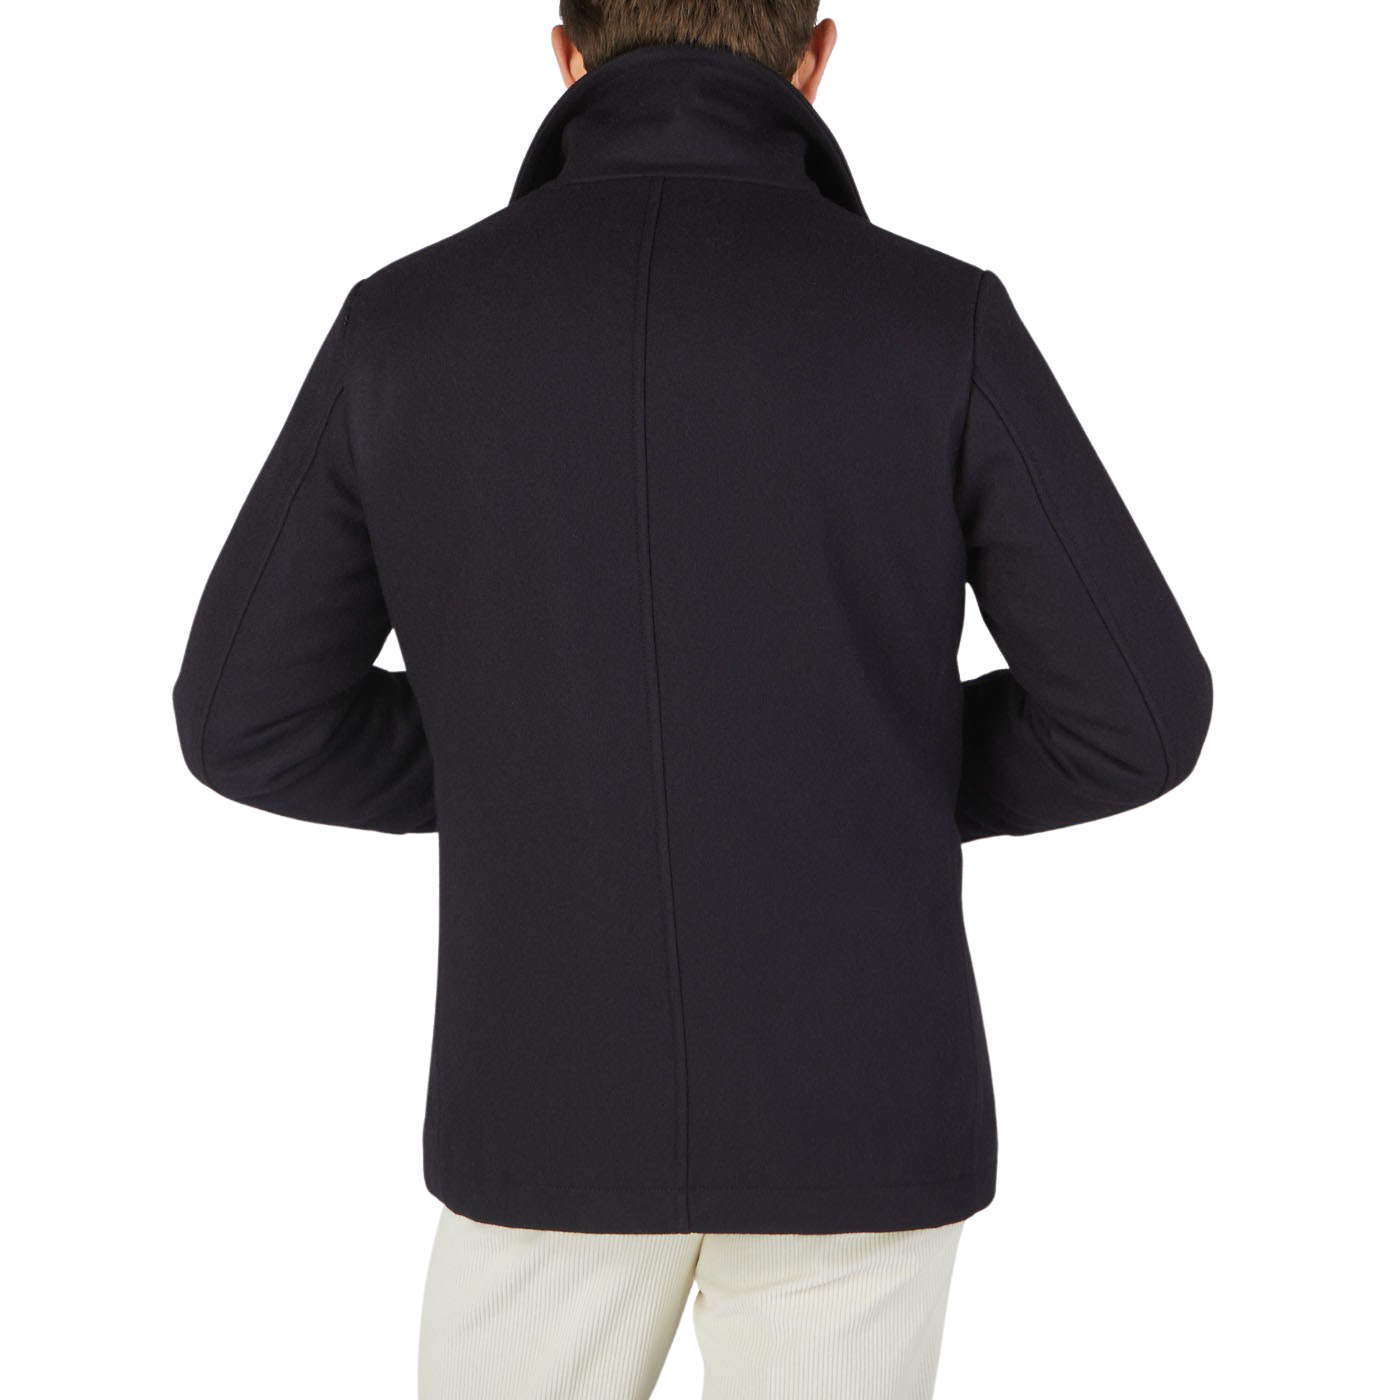 The back view of a man wearing a Navy Blue Heavy Wool Casentino Peacoat by Manifattura Ceccarelli.